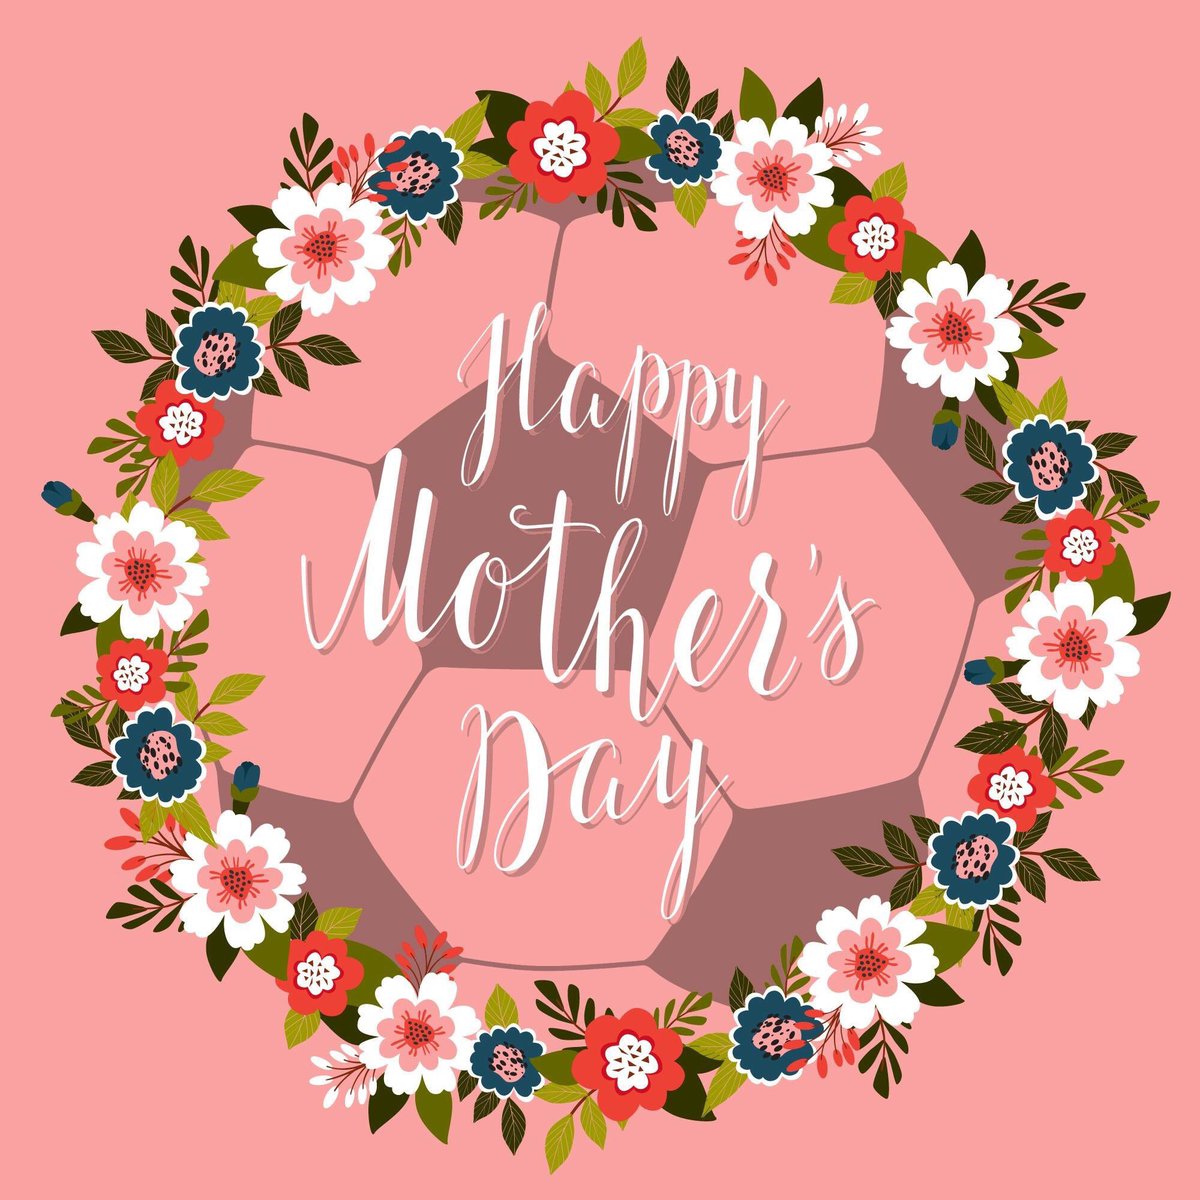 Happy Mother’s Day to the ones who show up front & center for our program on & off the pitch! We wish you front row treatment of pampering, relaxation, & blissful joy today and always. 🩷⚽️🩵